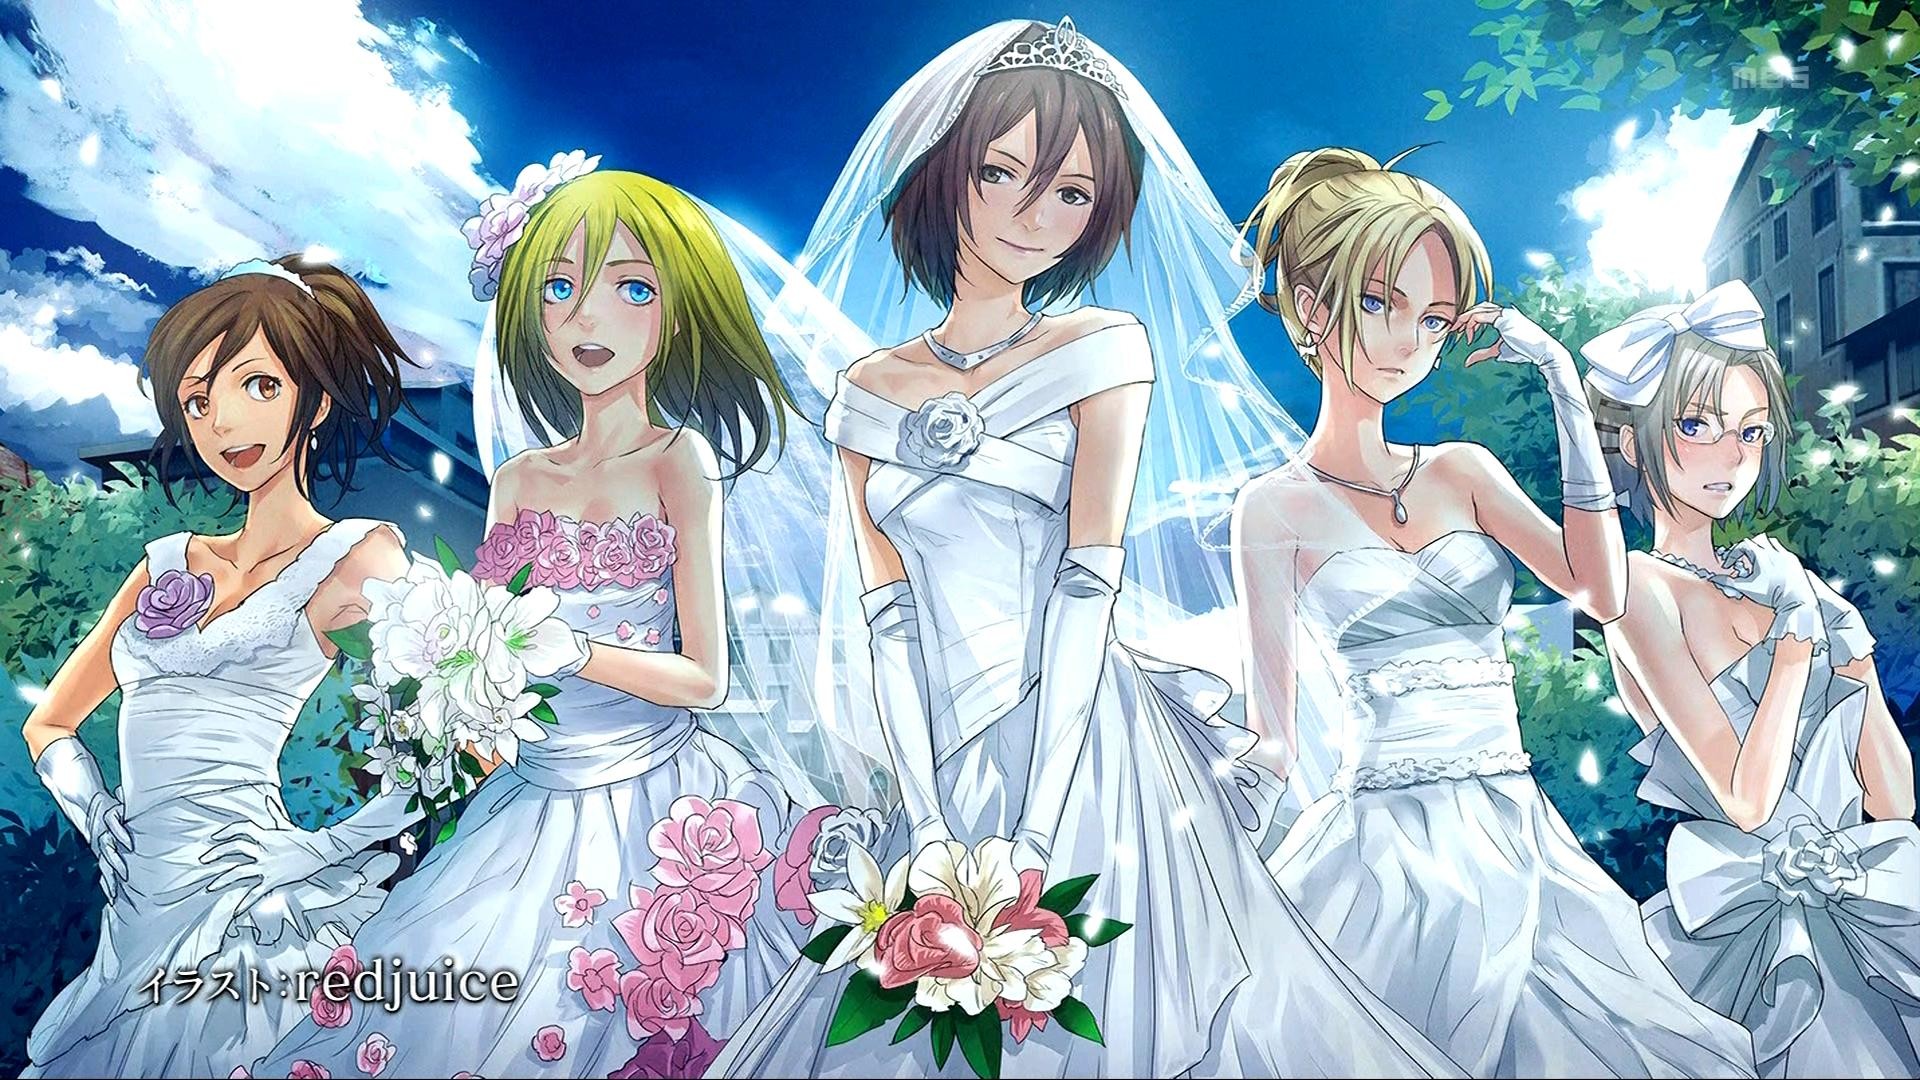 Anime 1920x1080 Shingeki no Kyojin anime Annie Leonhart Redjuice Historia Reiss Blouse Sasha group of women flowers brides looking at viewer brunette Rico Brzenska Renz Christa open mouth sky Mikasa Ackerman wedding dress clouds bare shoulders collarbone hair between eyes earring flower in hair tiaras plants elbow gloves braids white gloves gloves hands on hips short hair leaves glasses women with glasses closed mouth smiling